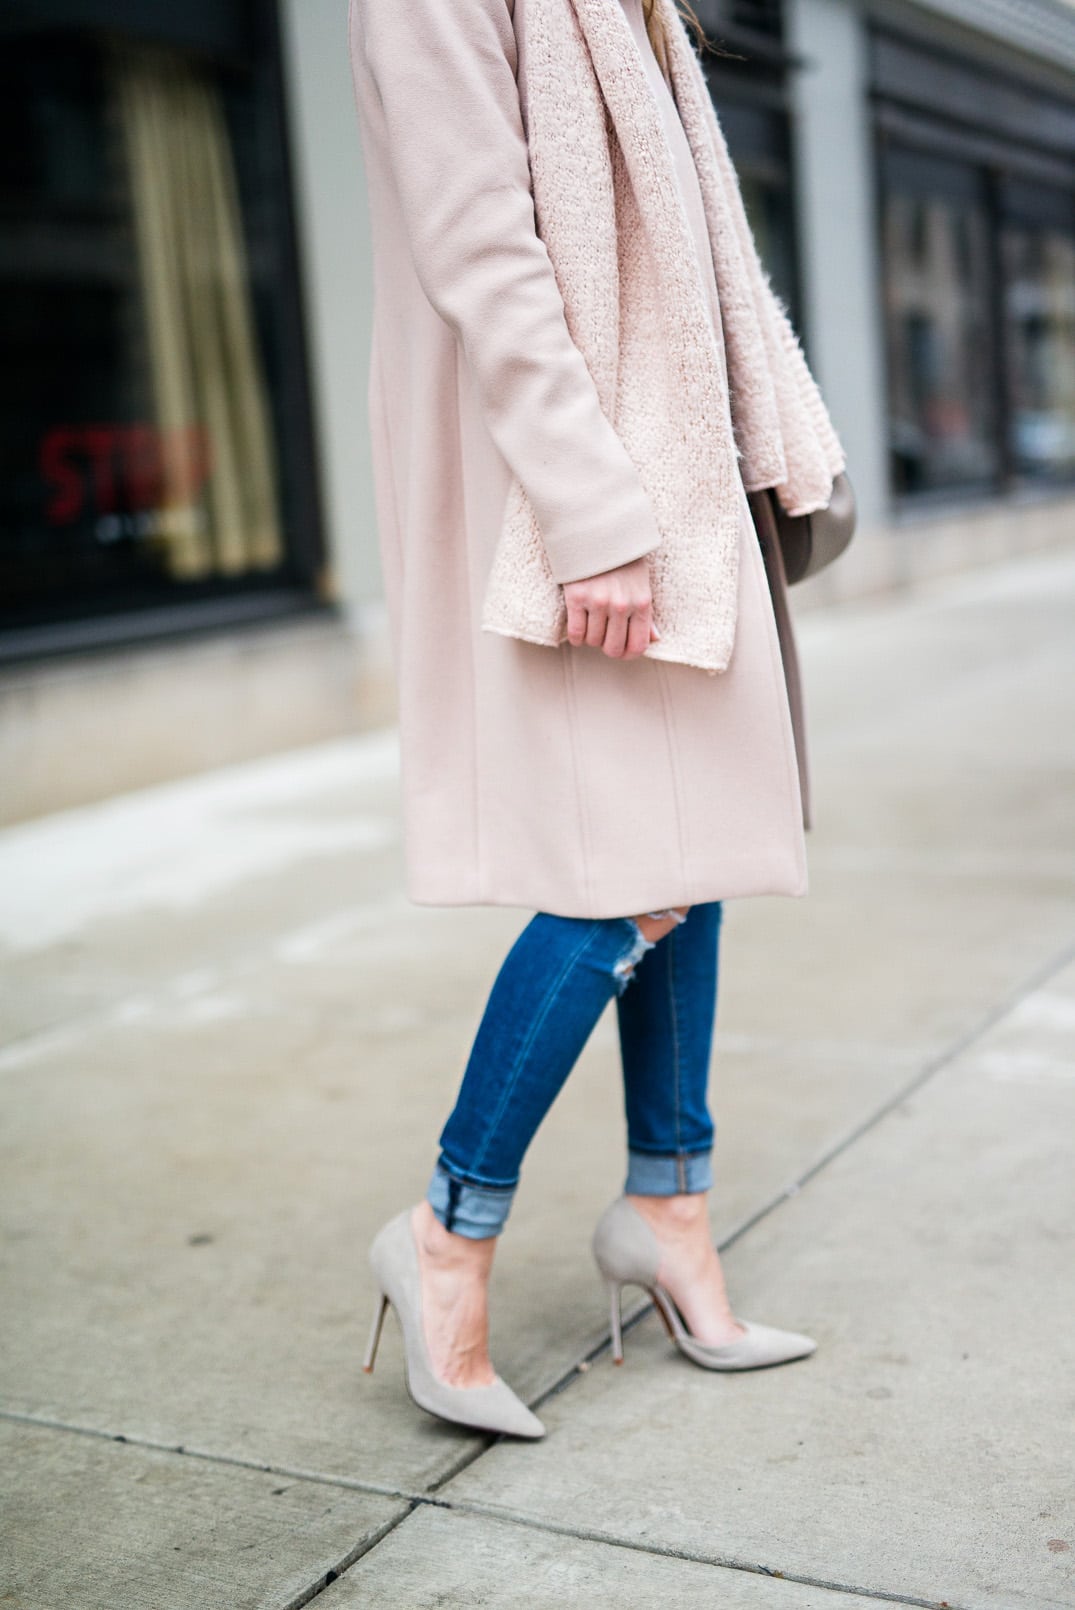 Pam Hetlinger, The Girl From Panama wearing rose quartz color of the year, funnel neck pink coat, asos ripped jeans, schutz grey pumps, celine sunglasses, forever 21 pink scarf, and a chloe drew bag in grey.